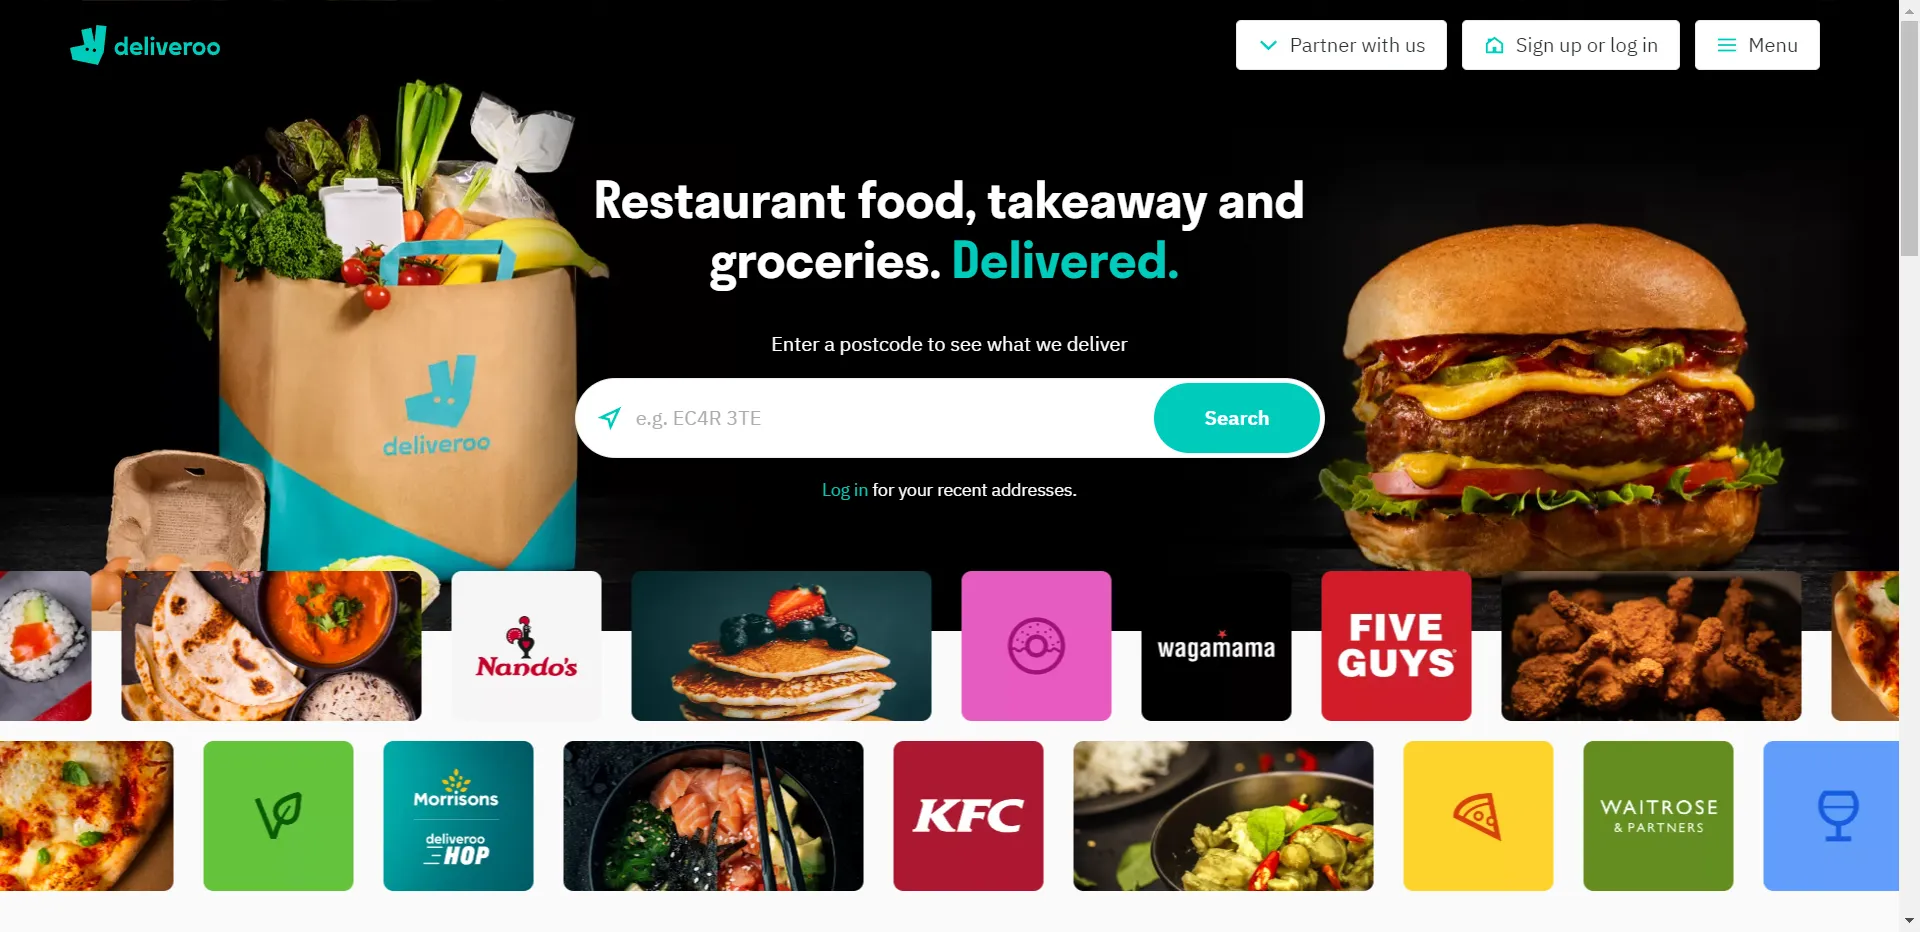 Deliveroo-Upselling and Cross-Selling